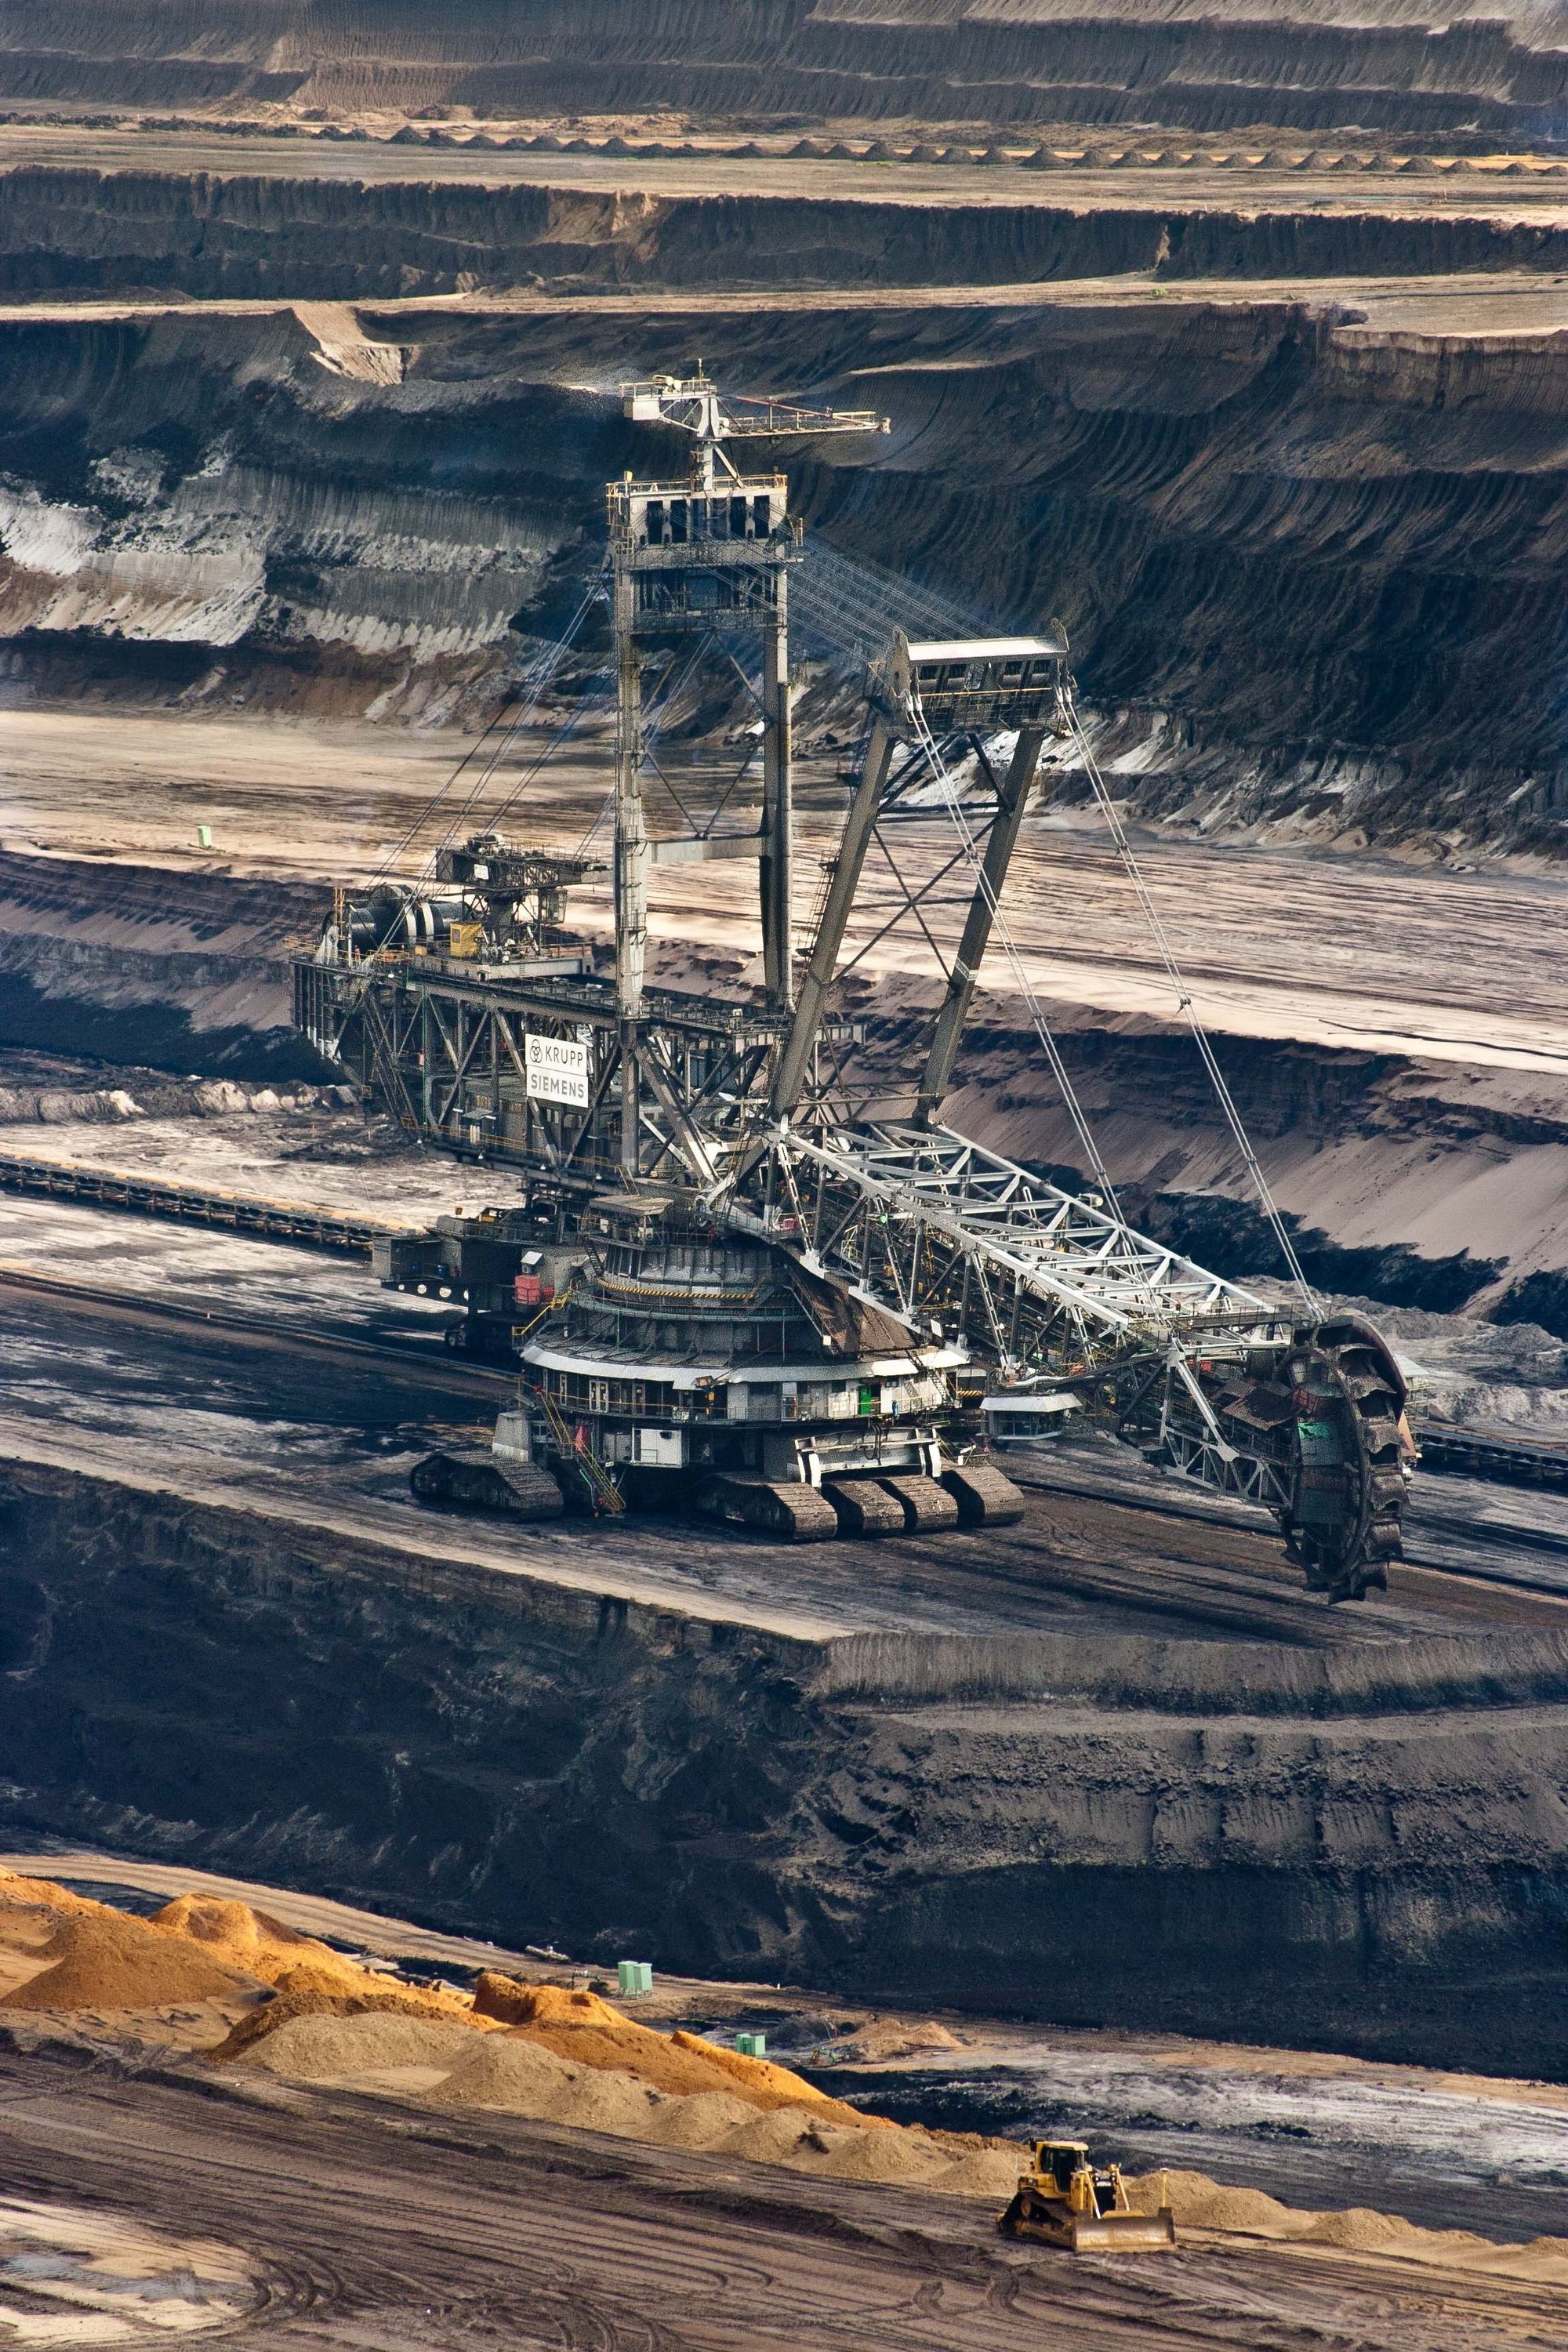 Coal Mining and the Technologies Reshaping Our World - and Workforce?